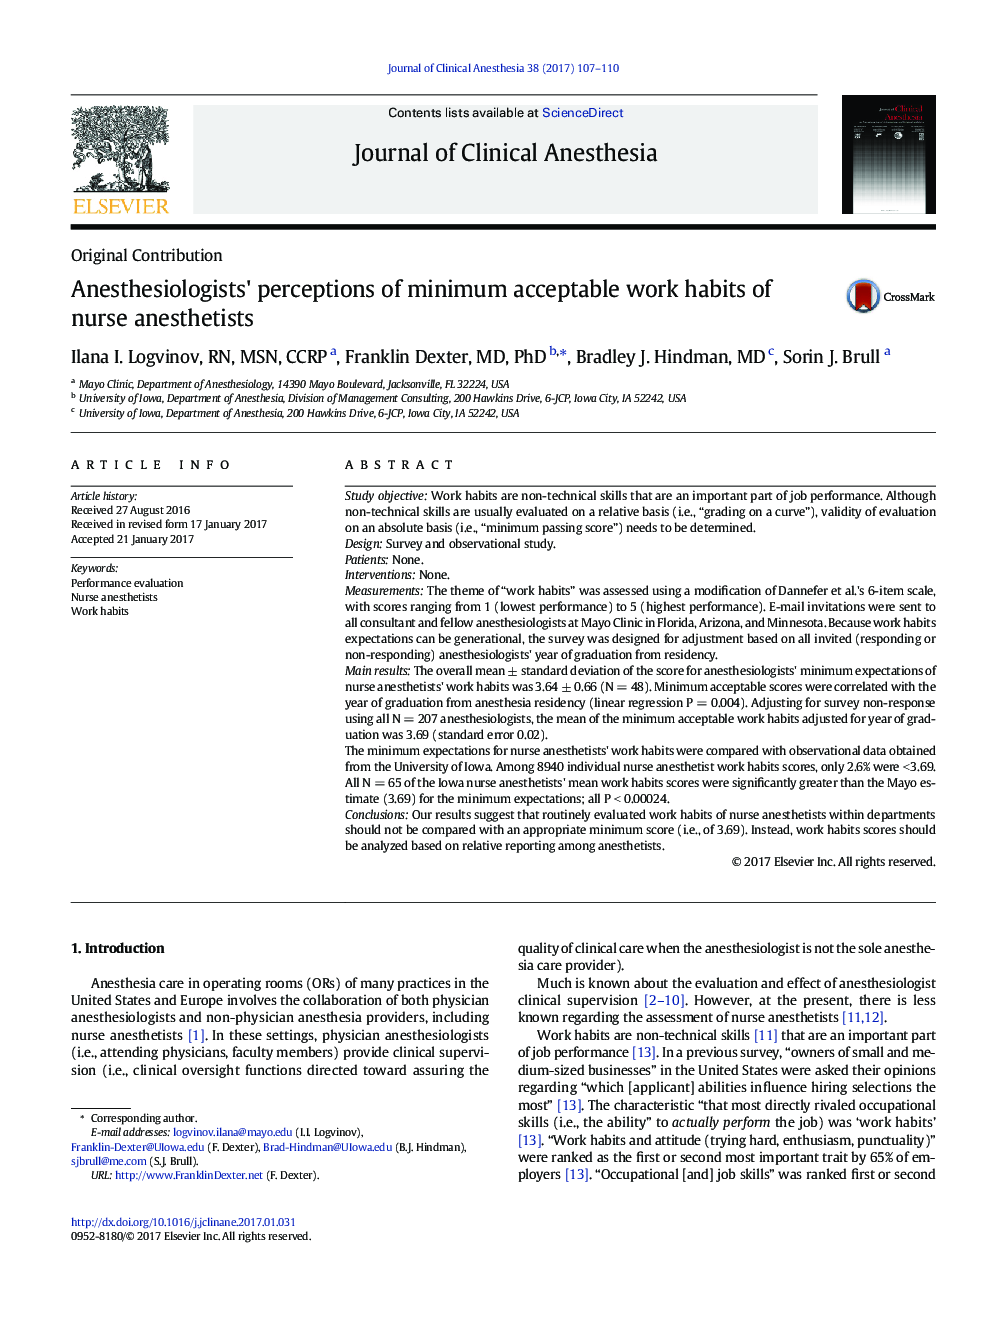 Anesthesiologists' perceptions of minimum acceptable work habits of nurse anesthetists